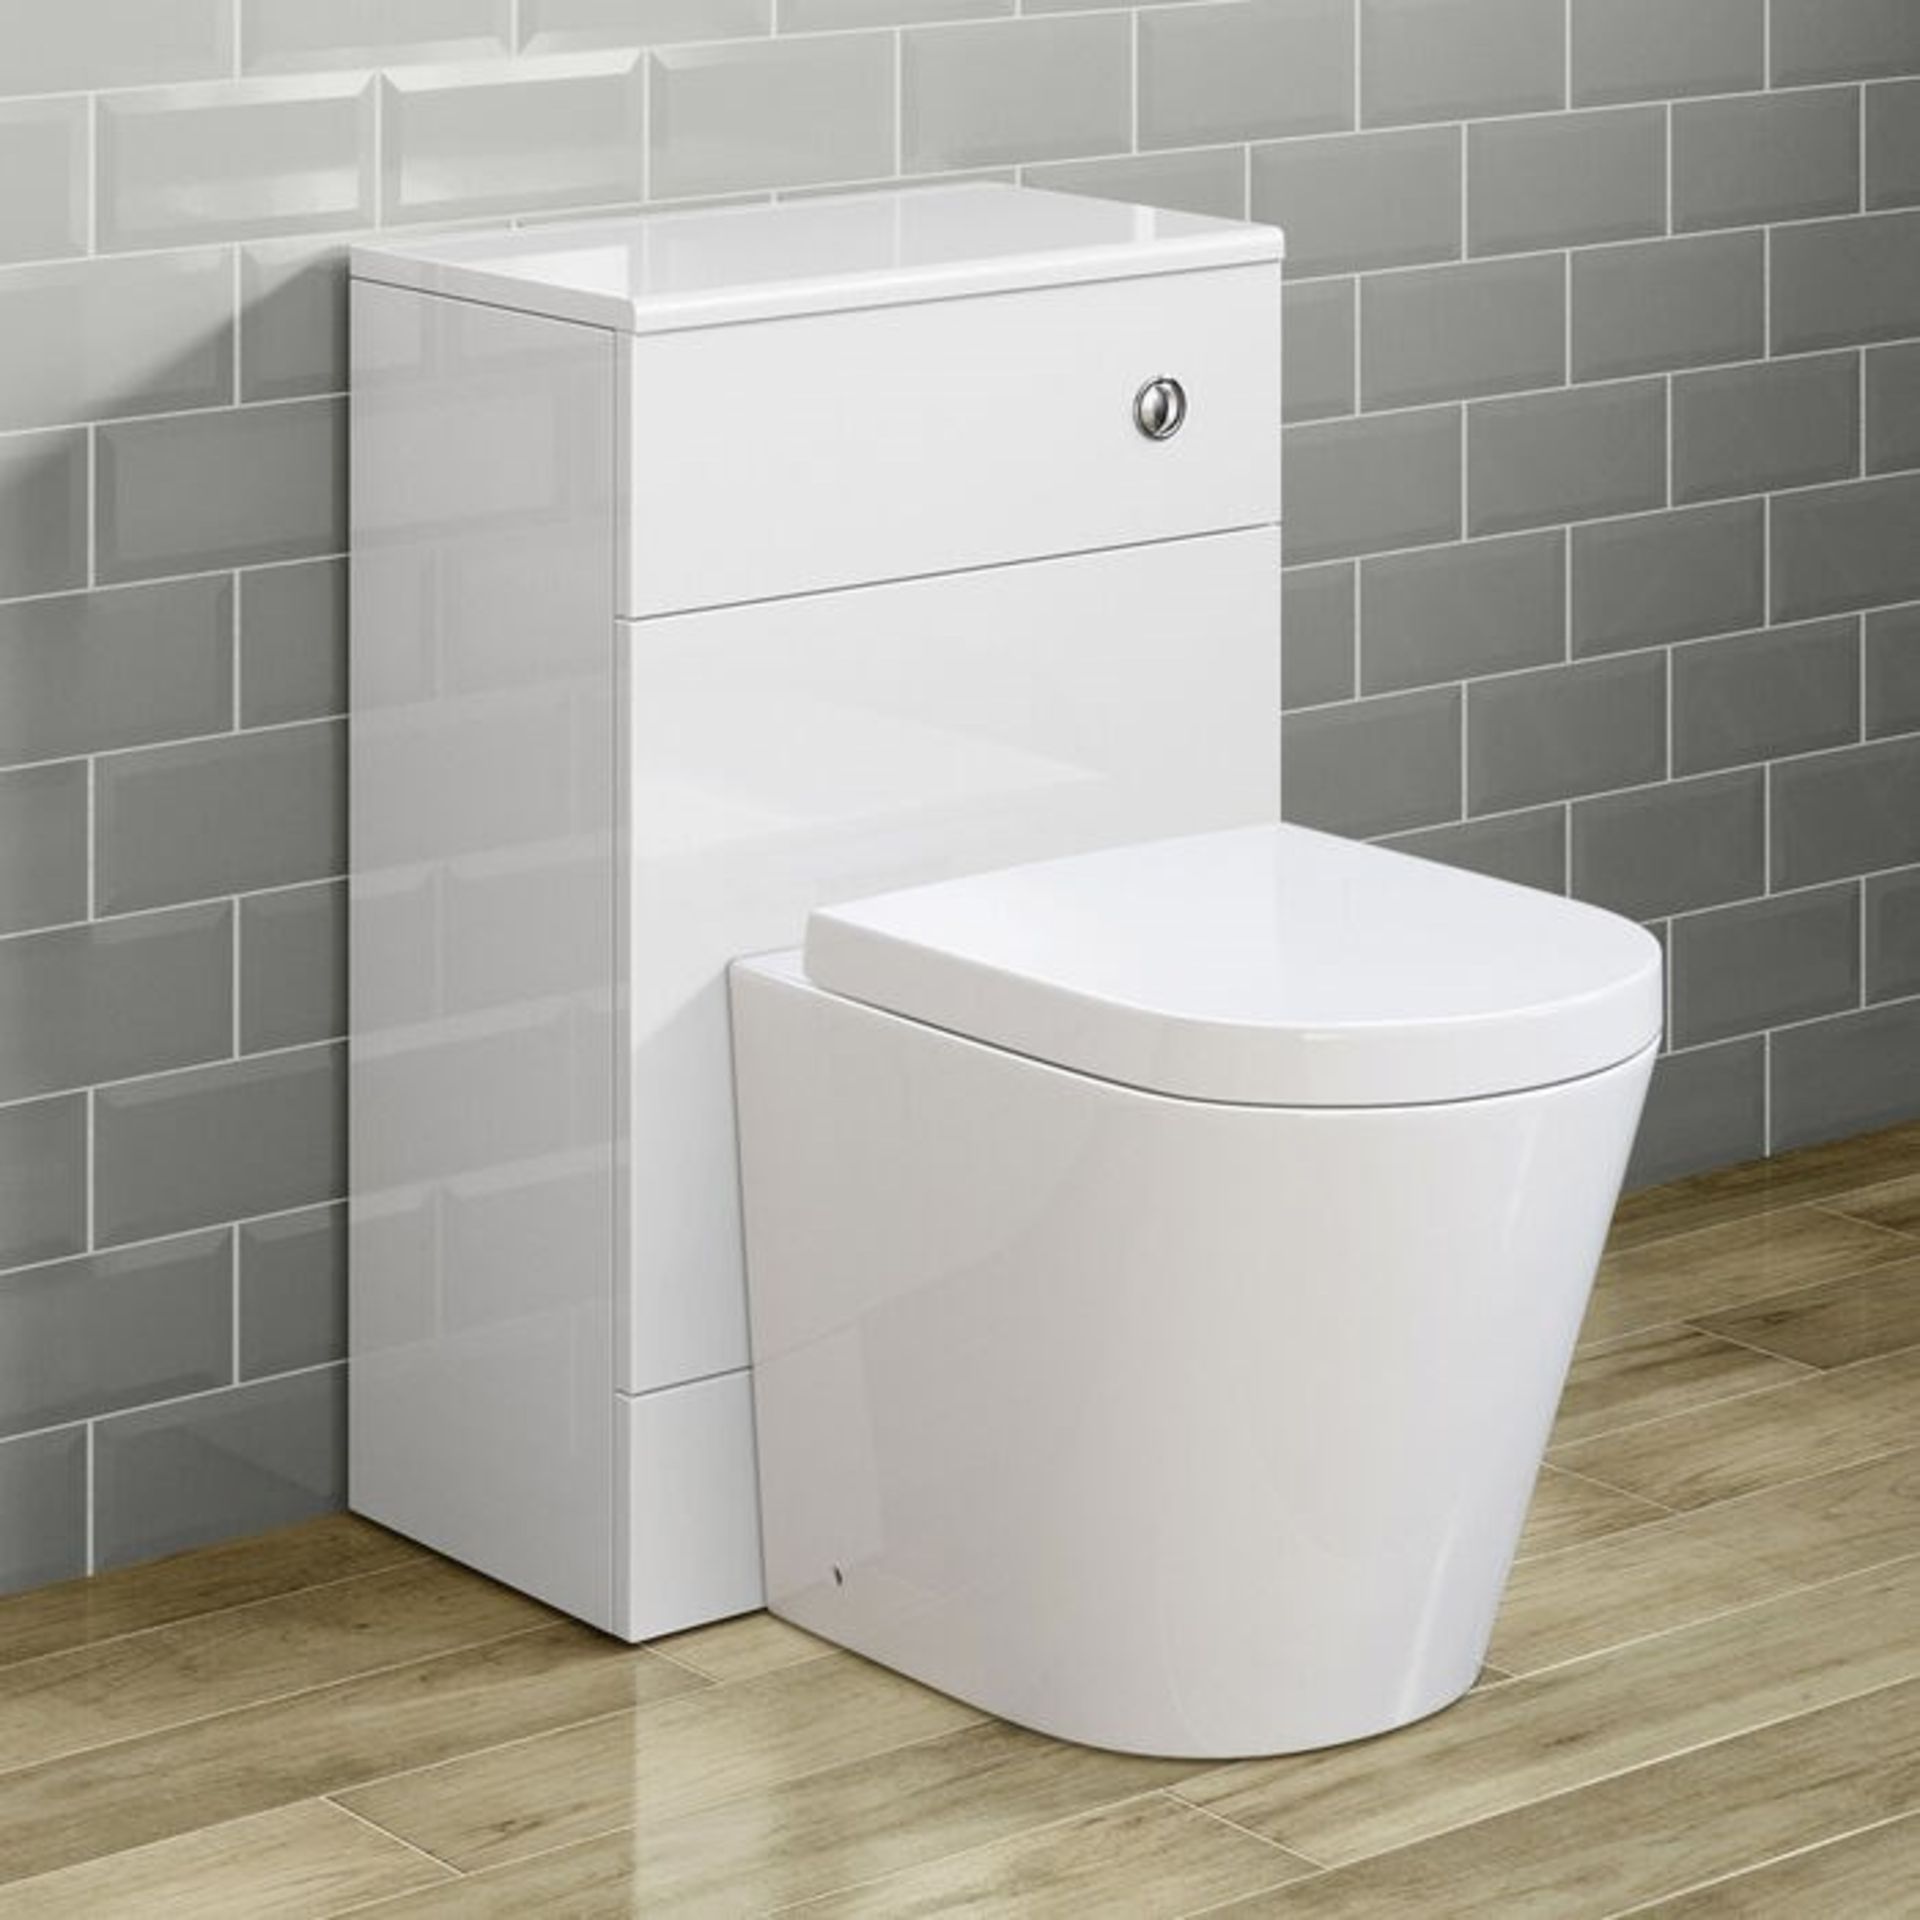 500mm Harper Gloss White Back To Wall Toilet Unit. Mf2005. Our discreet unit cleverly houses an...